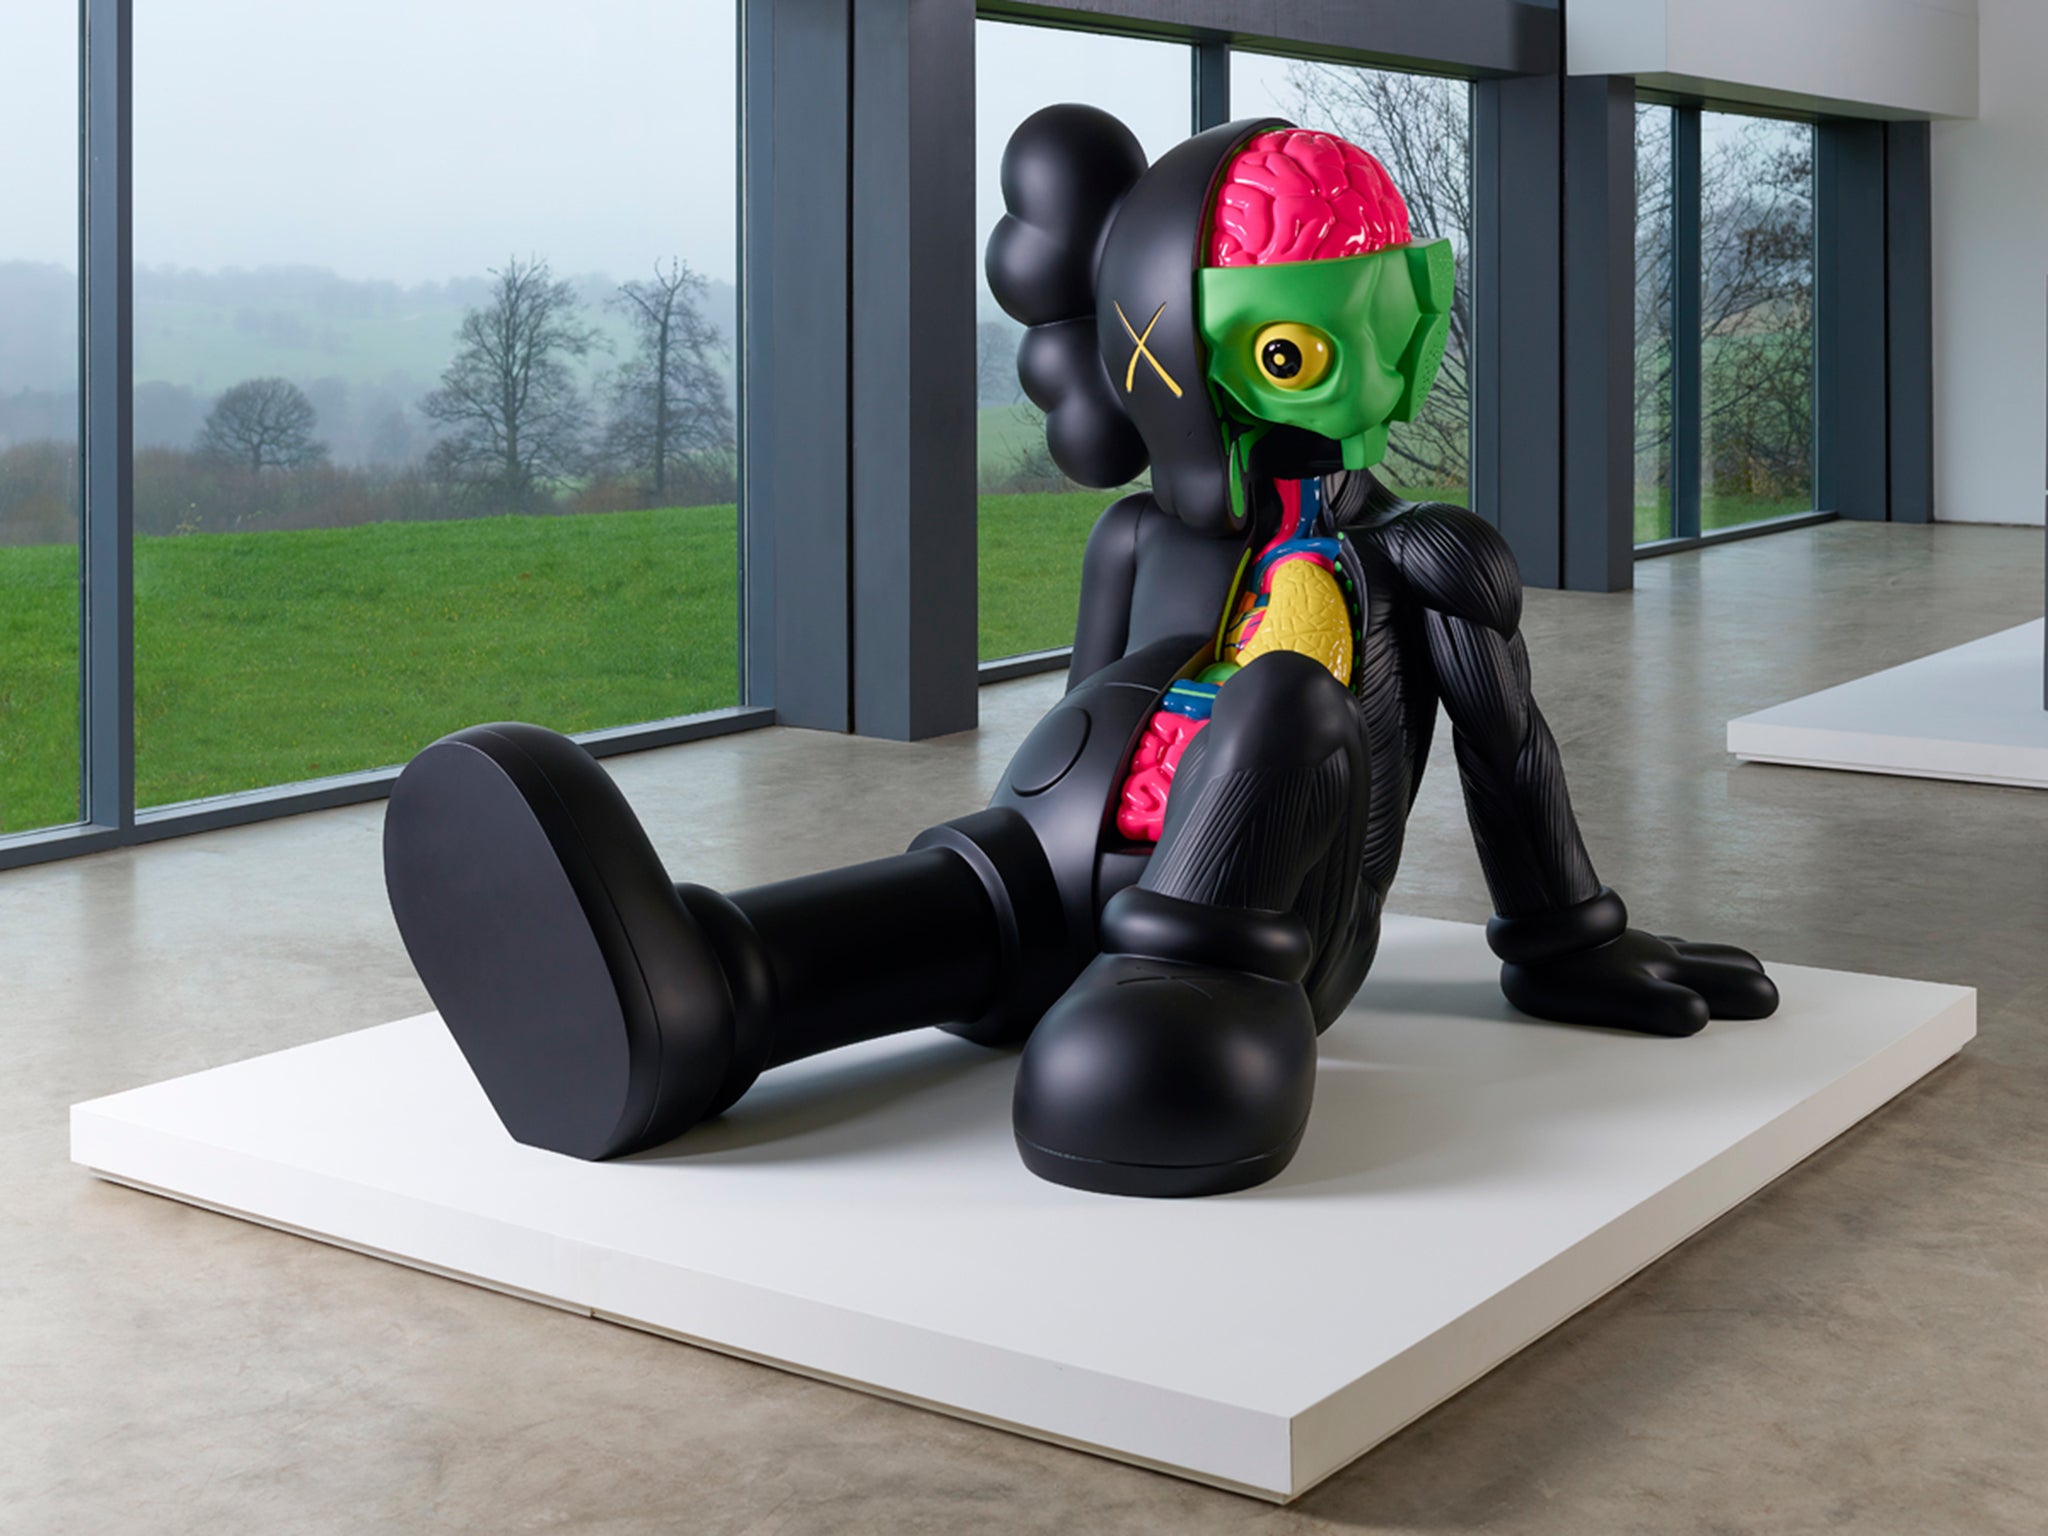 'Companion (Resting place)' (2013) by KAWS